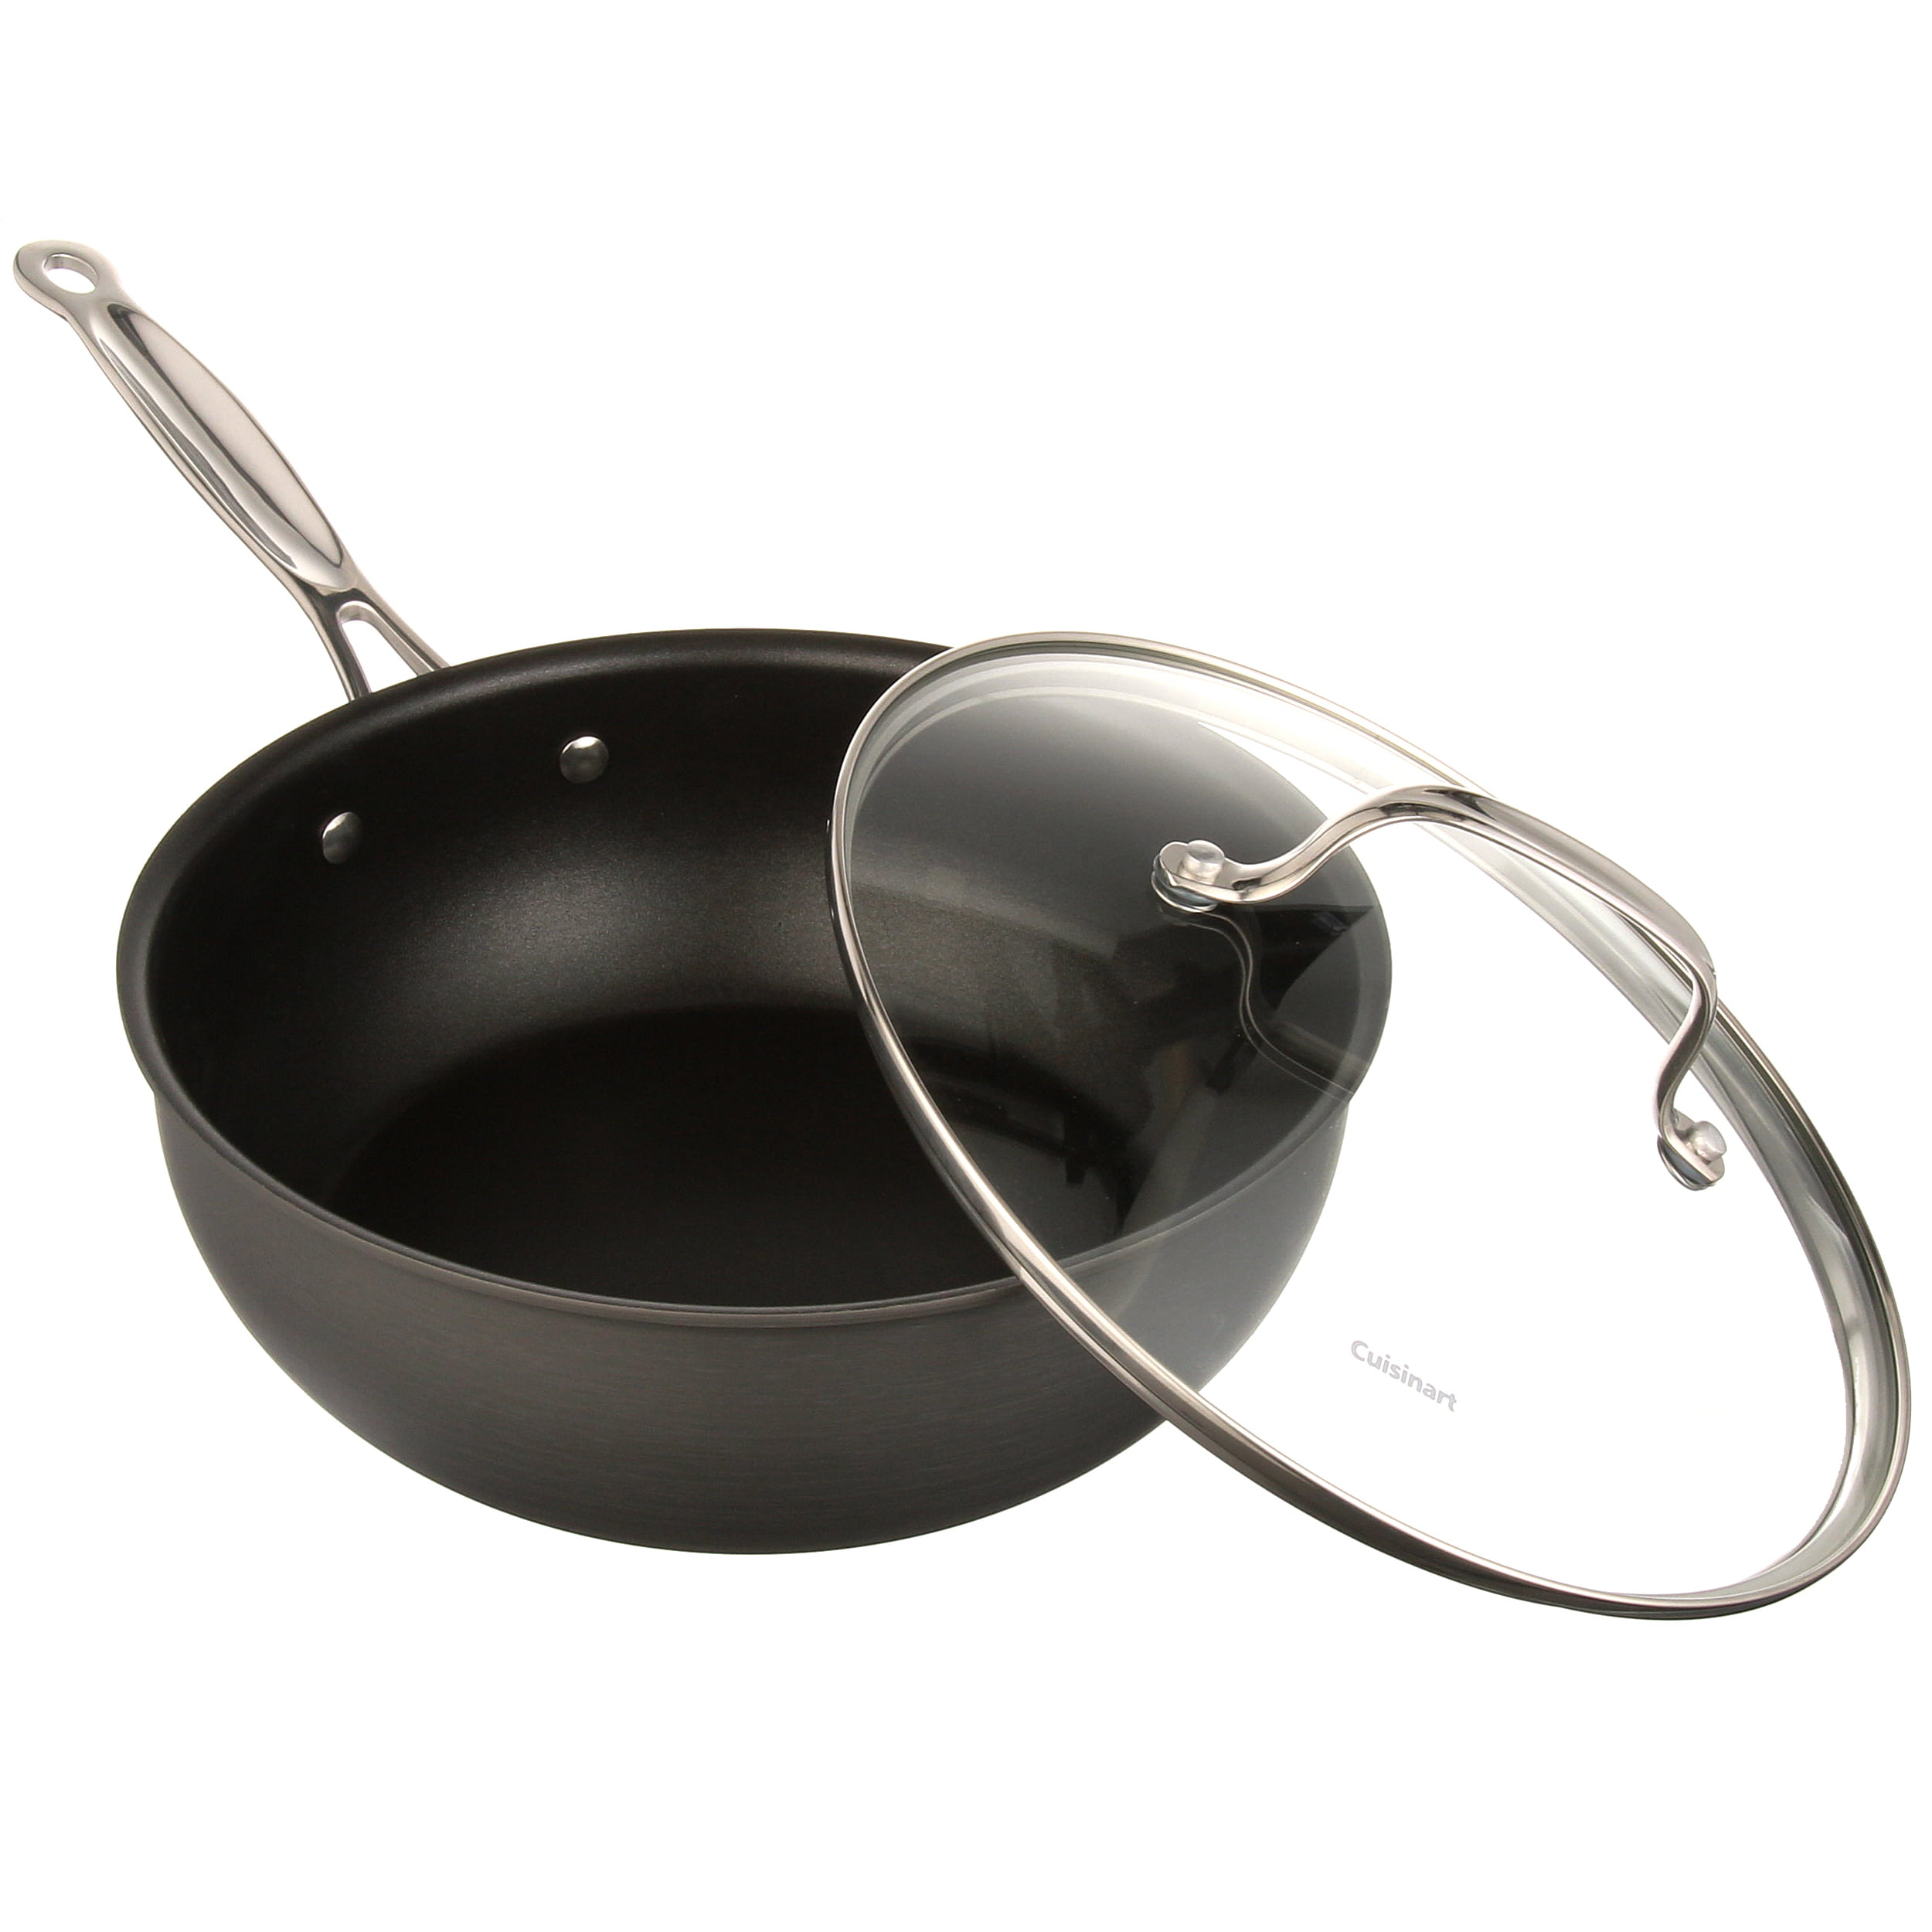 Cuisinart Classic 3qt Non-stick Saucepan With Cover - 8319-20ns : Target